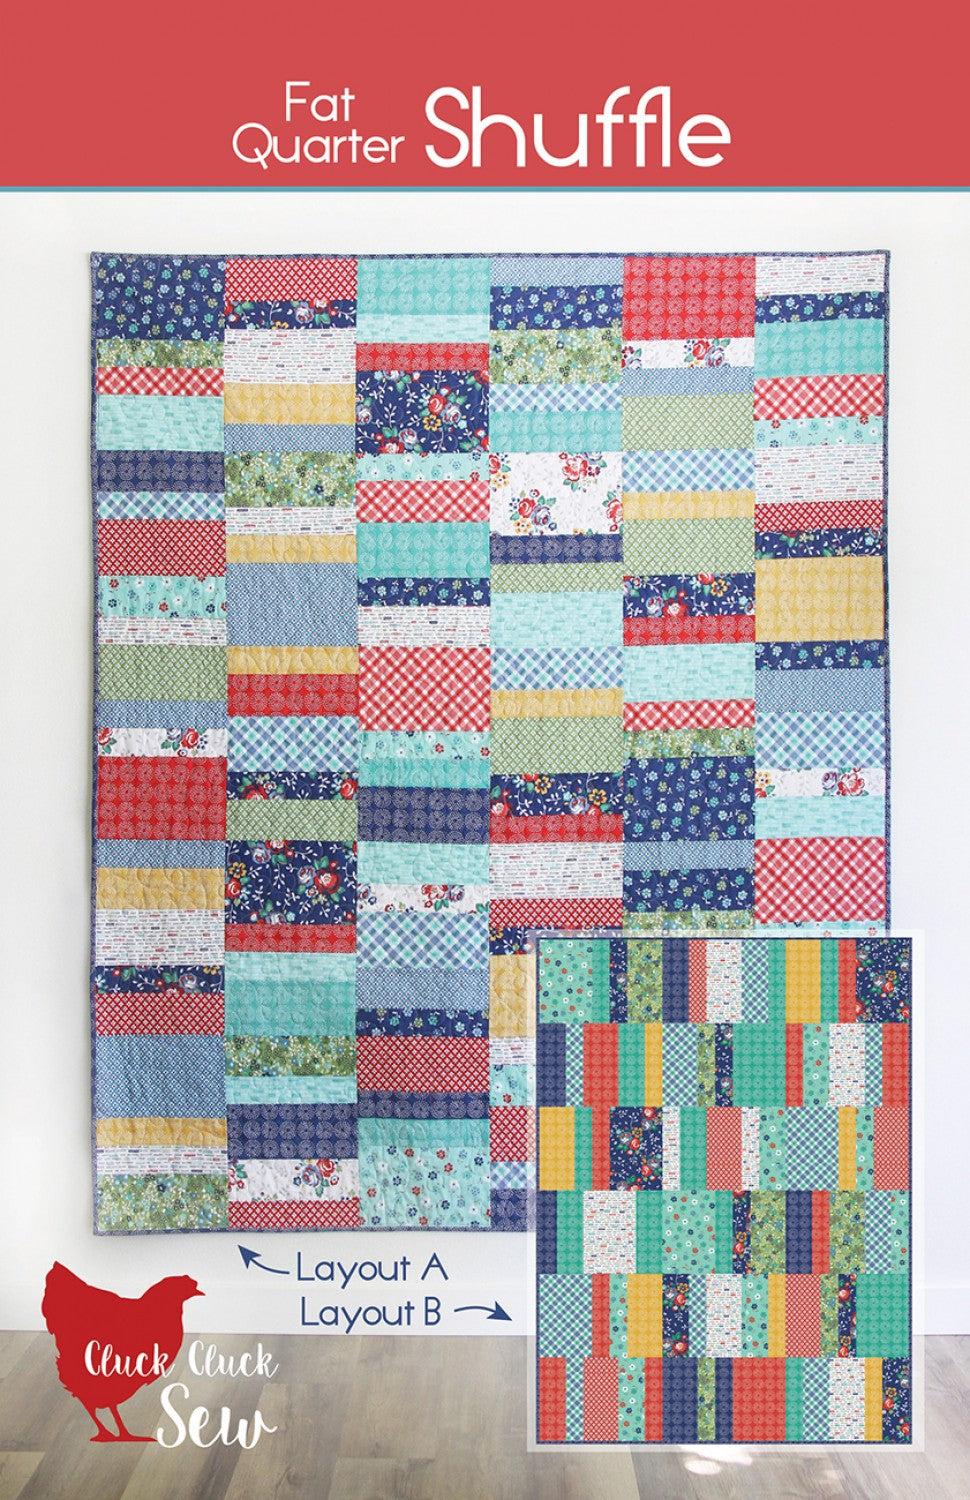 Fat Quarter Shuffle by Cluck Cluck Sew - PAPER Pattern